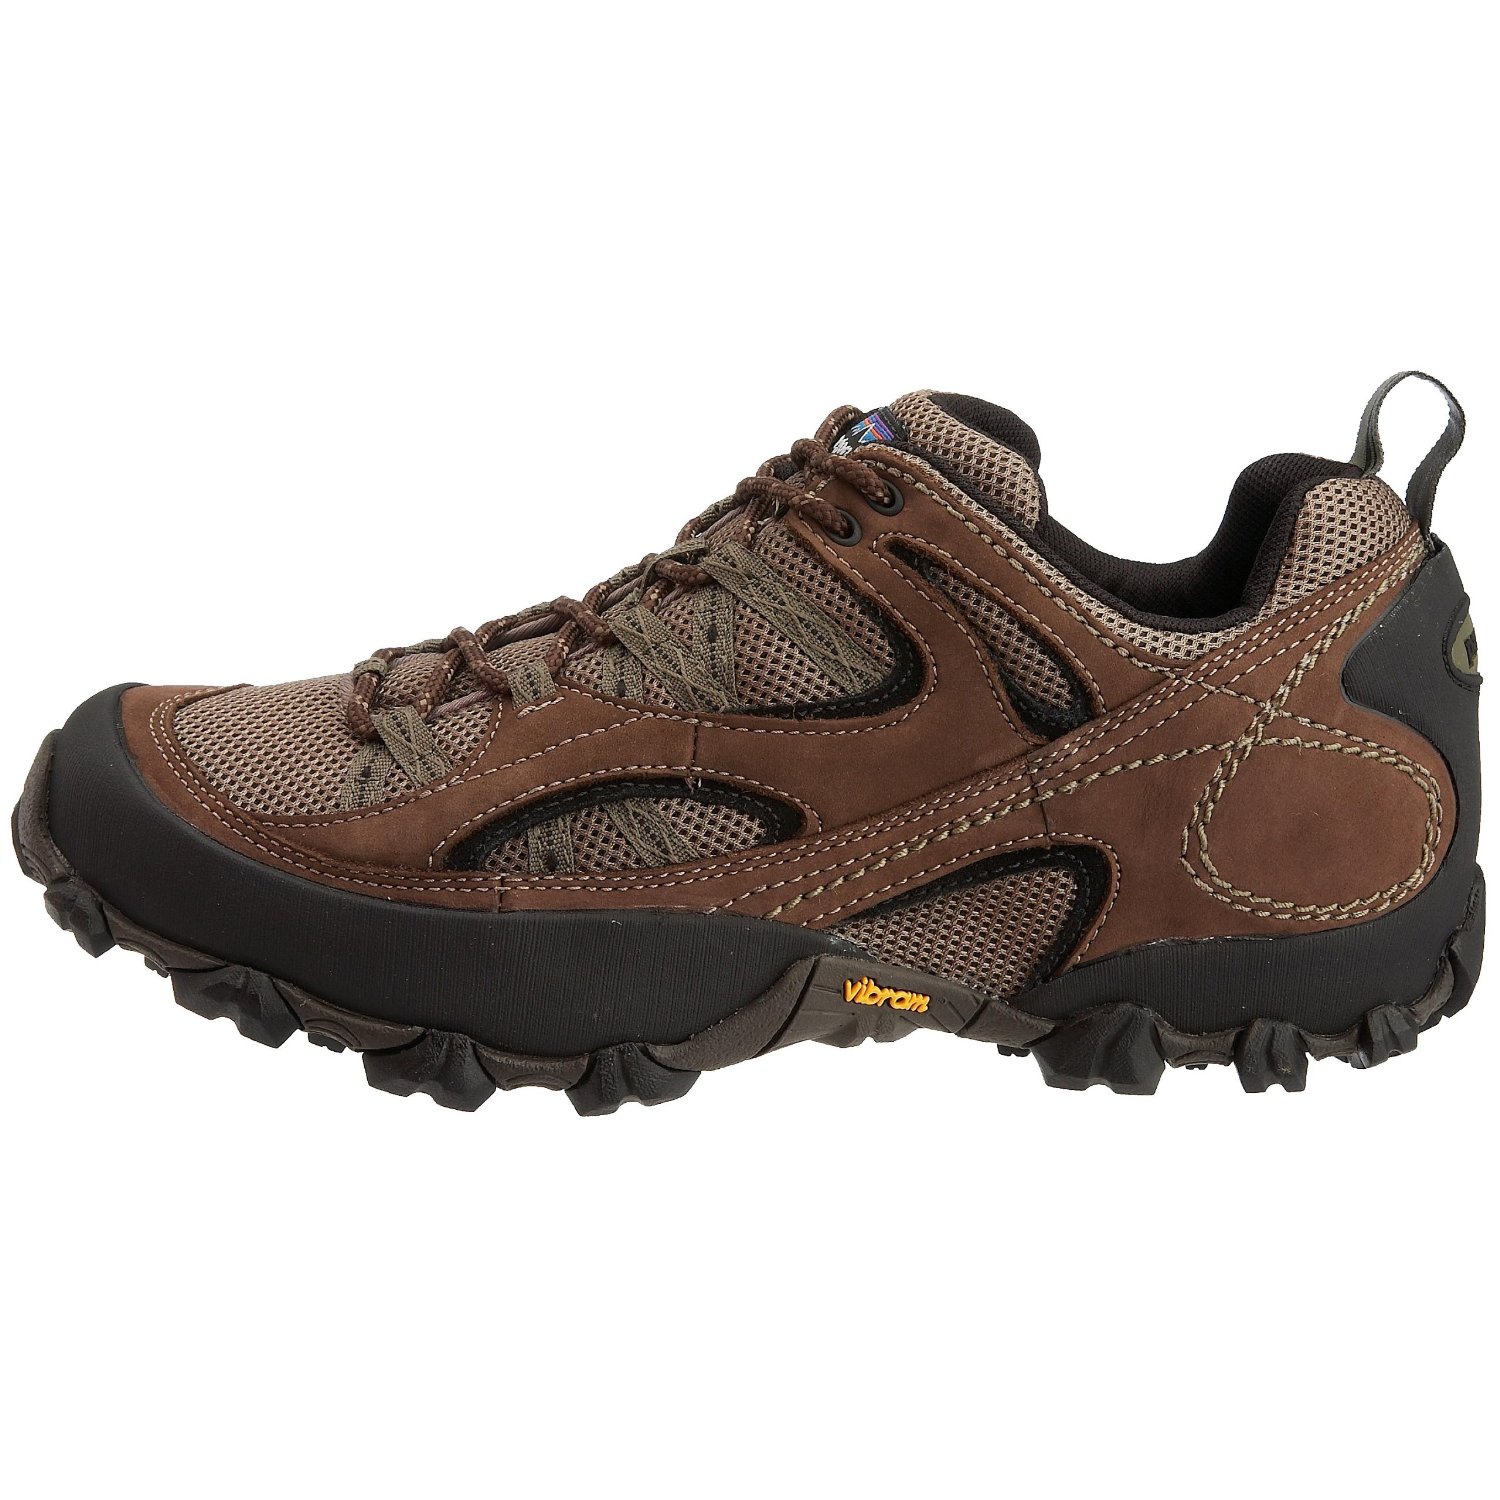 Hiking Shoes Here: September 2012